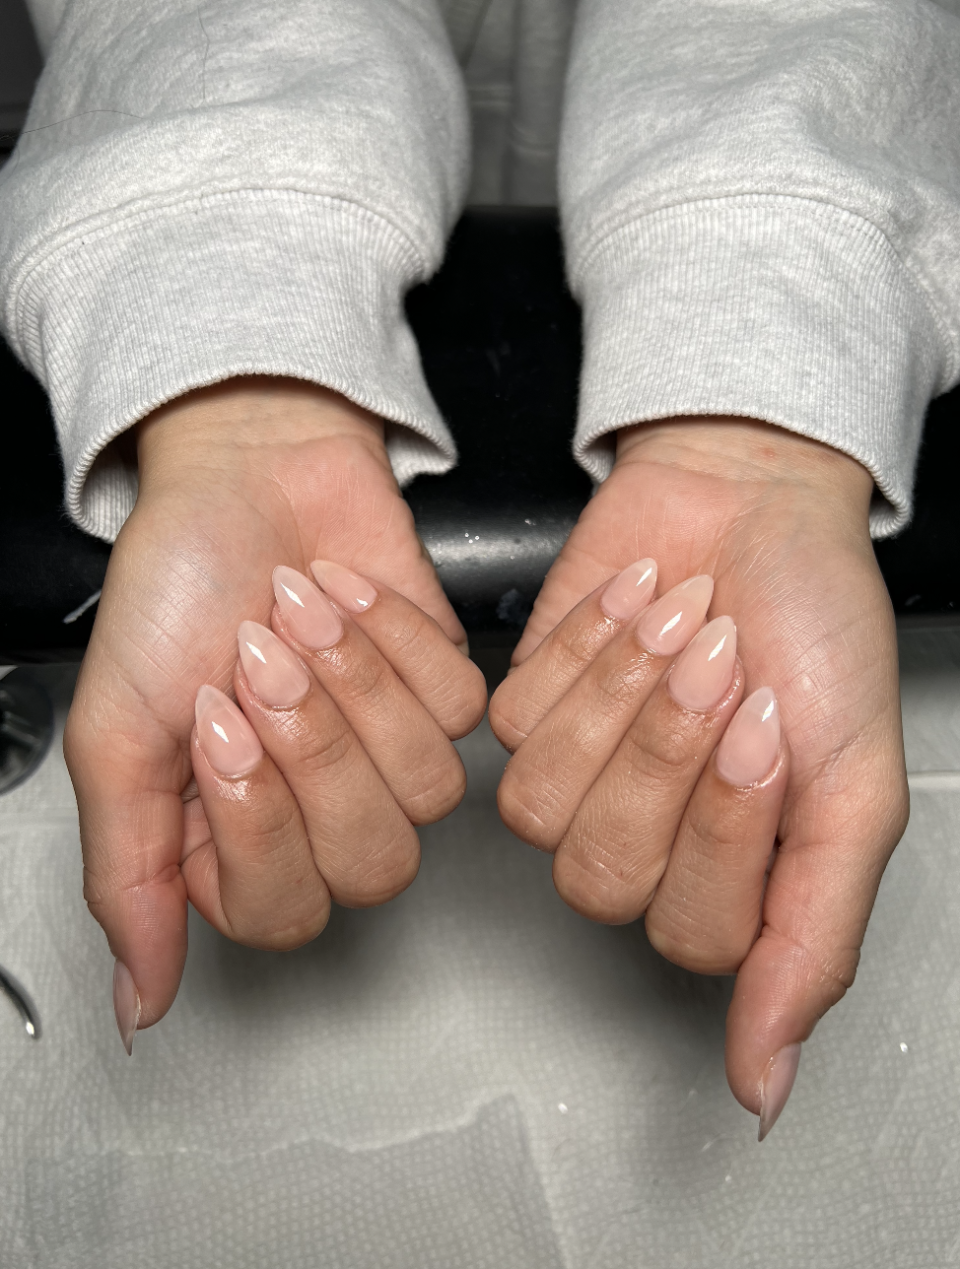 Person displaying hands with long, manicured nails in a neutral shade